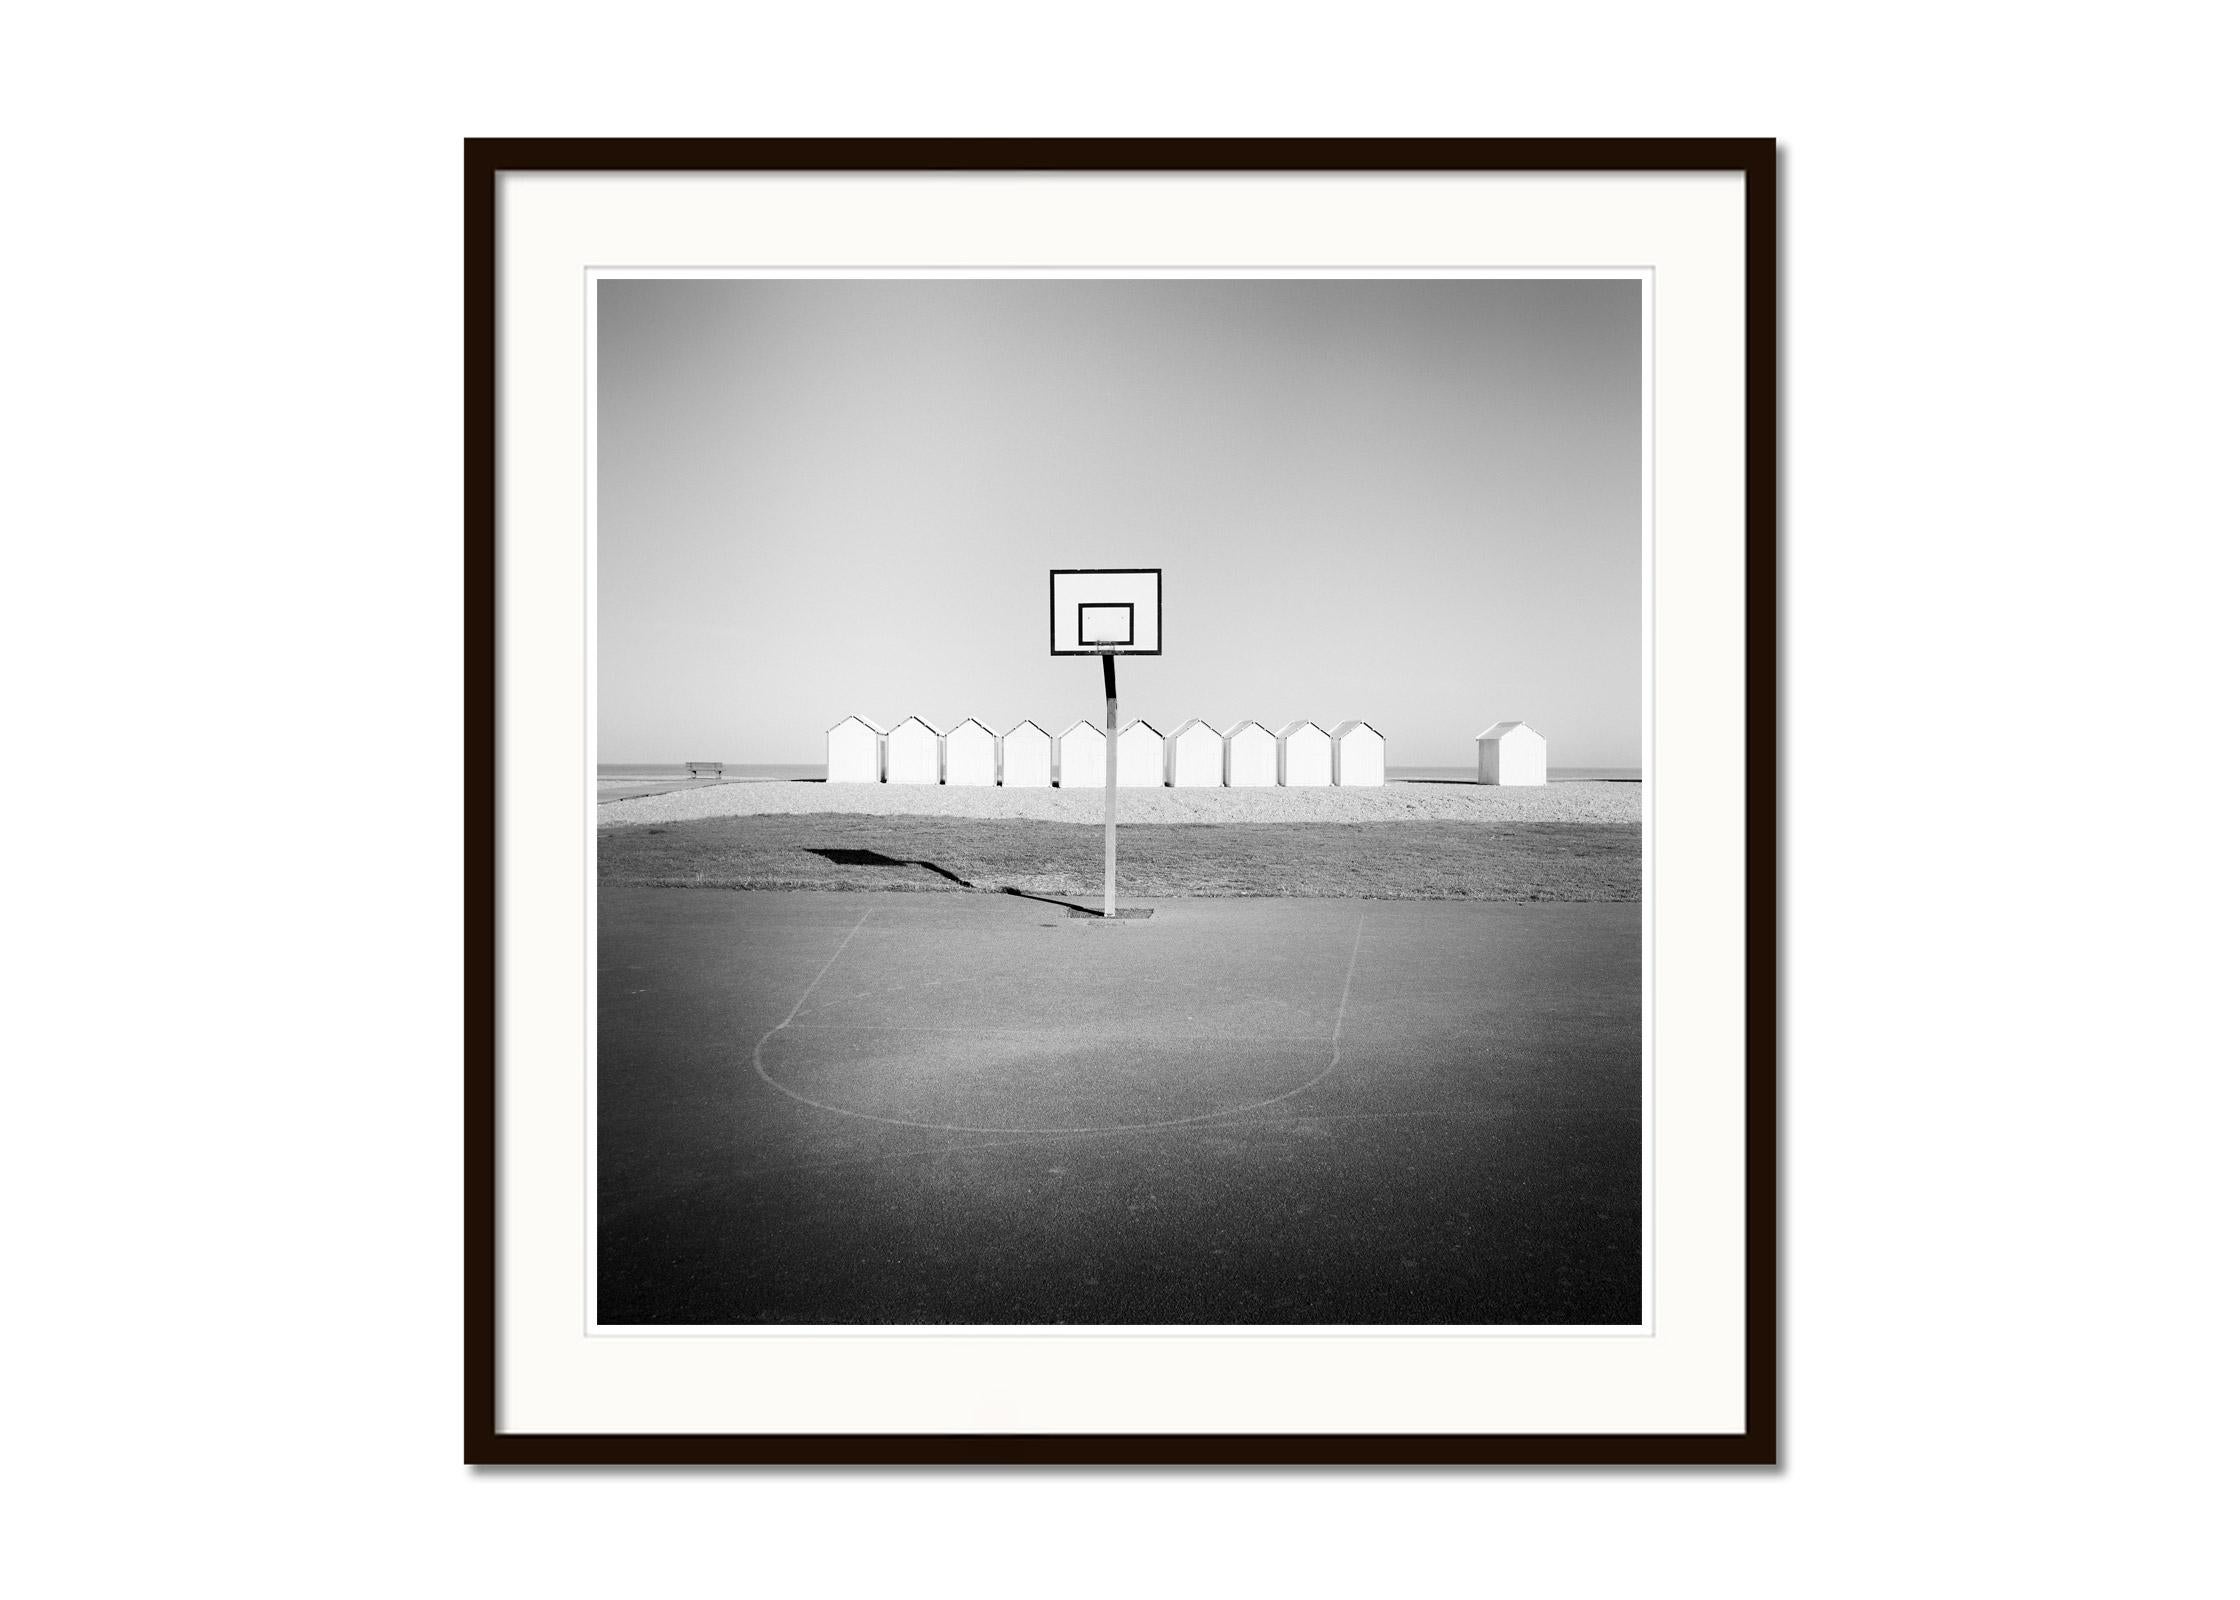 Playground, Beach Huts, Basketball, France, black white landscape photography - Gray Landscape Photograph by Gerald Berghammer